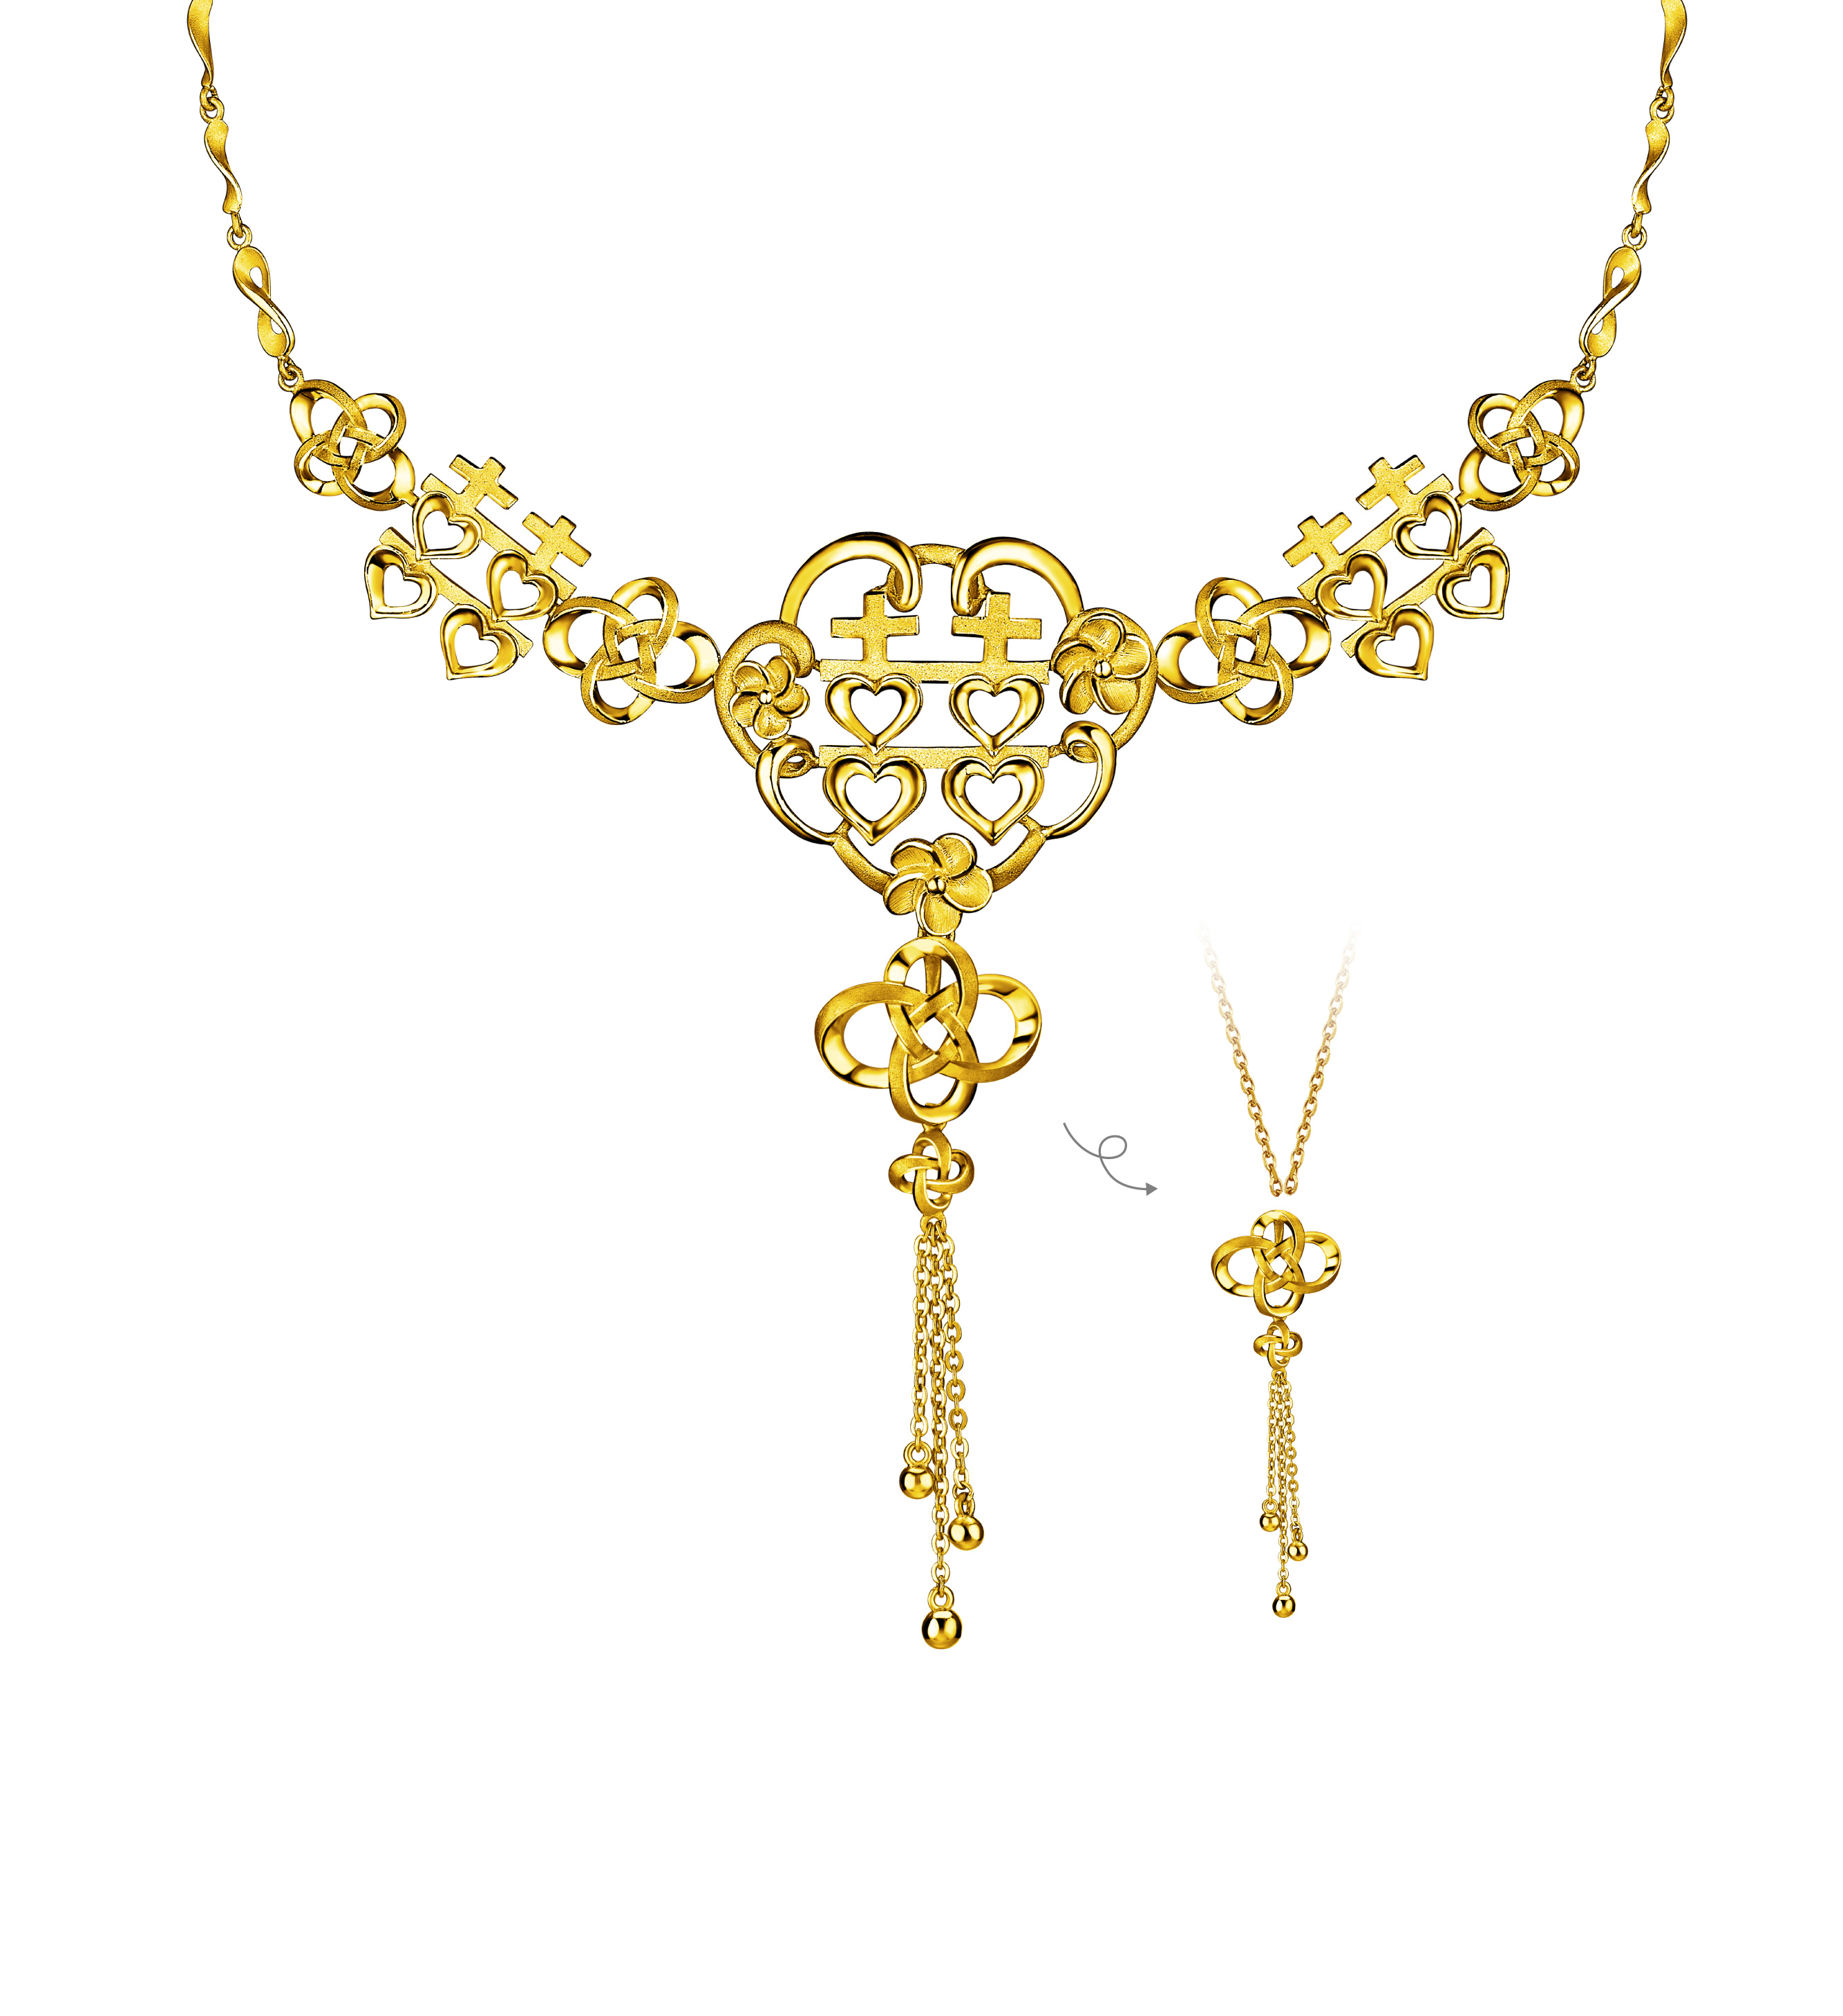 Beloved Collection "Blissful Union" Wedding Gold Necklace